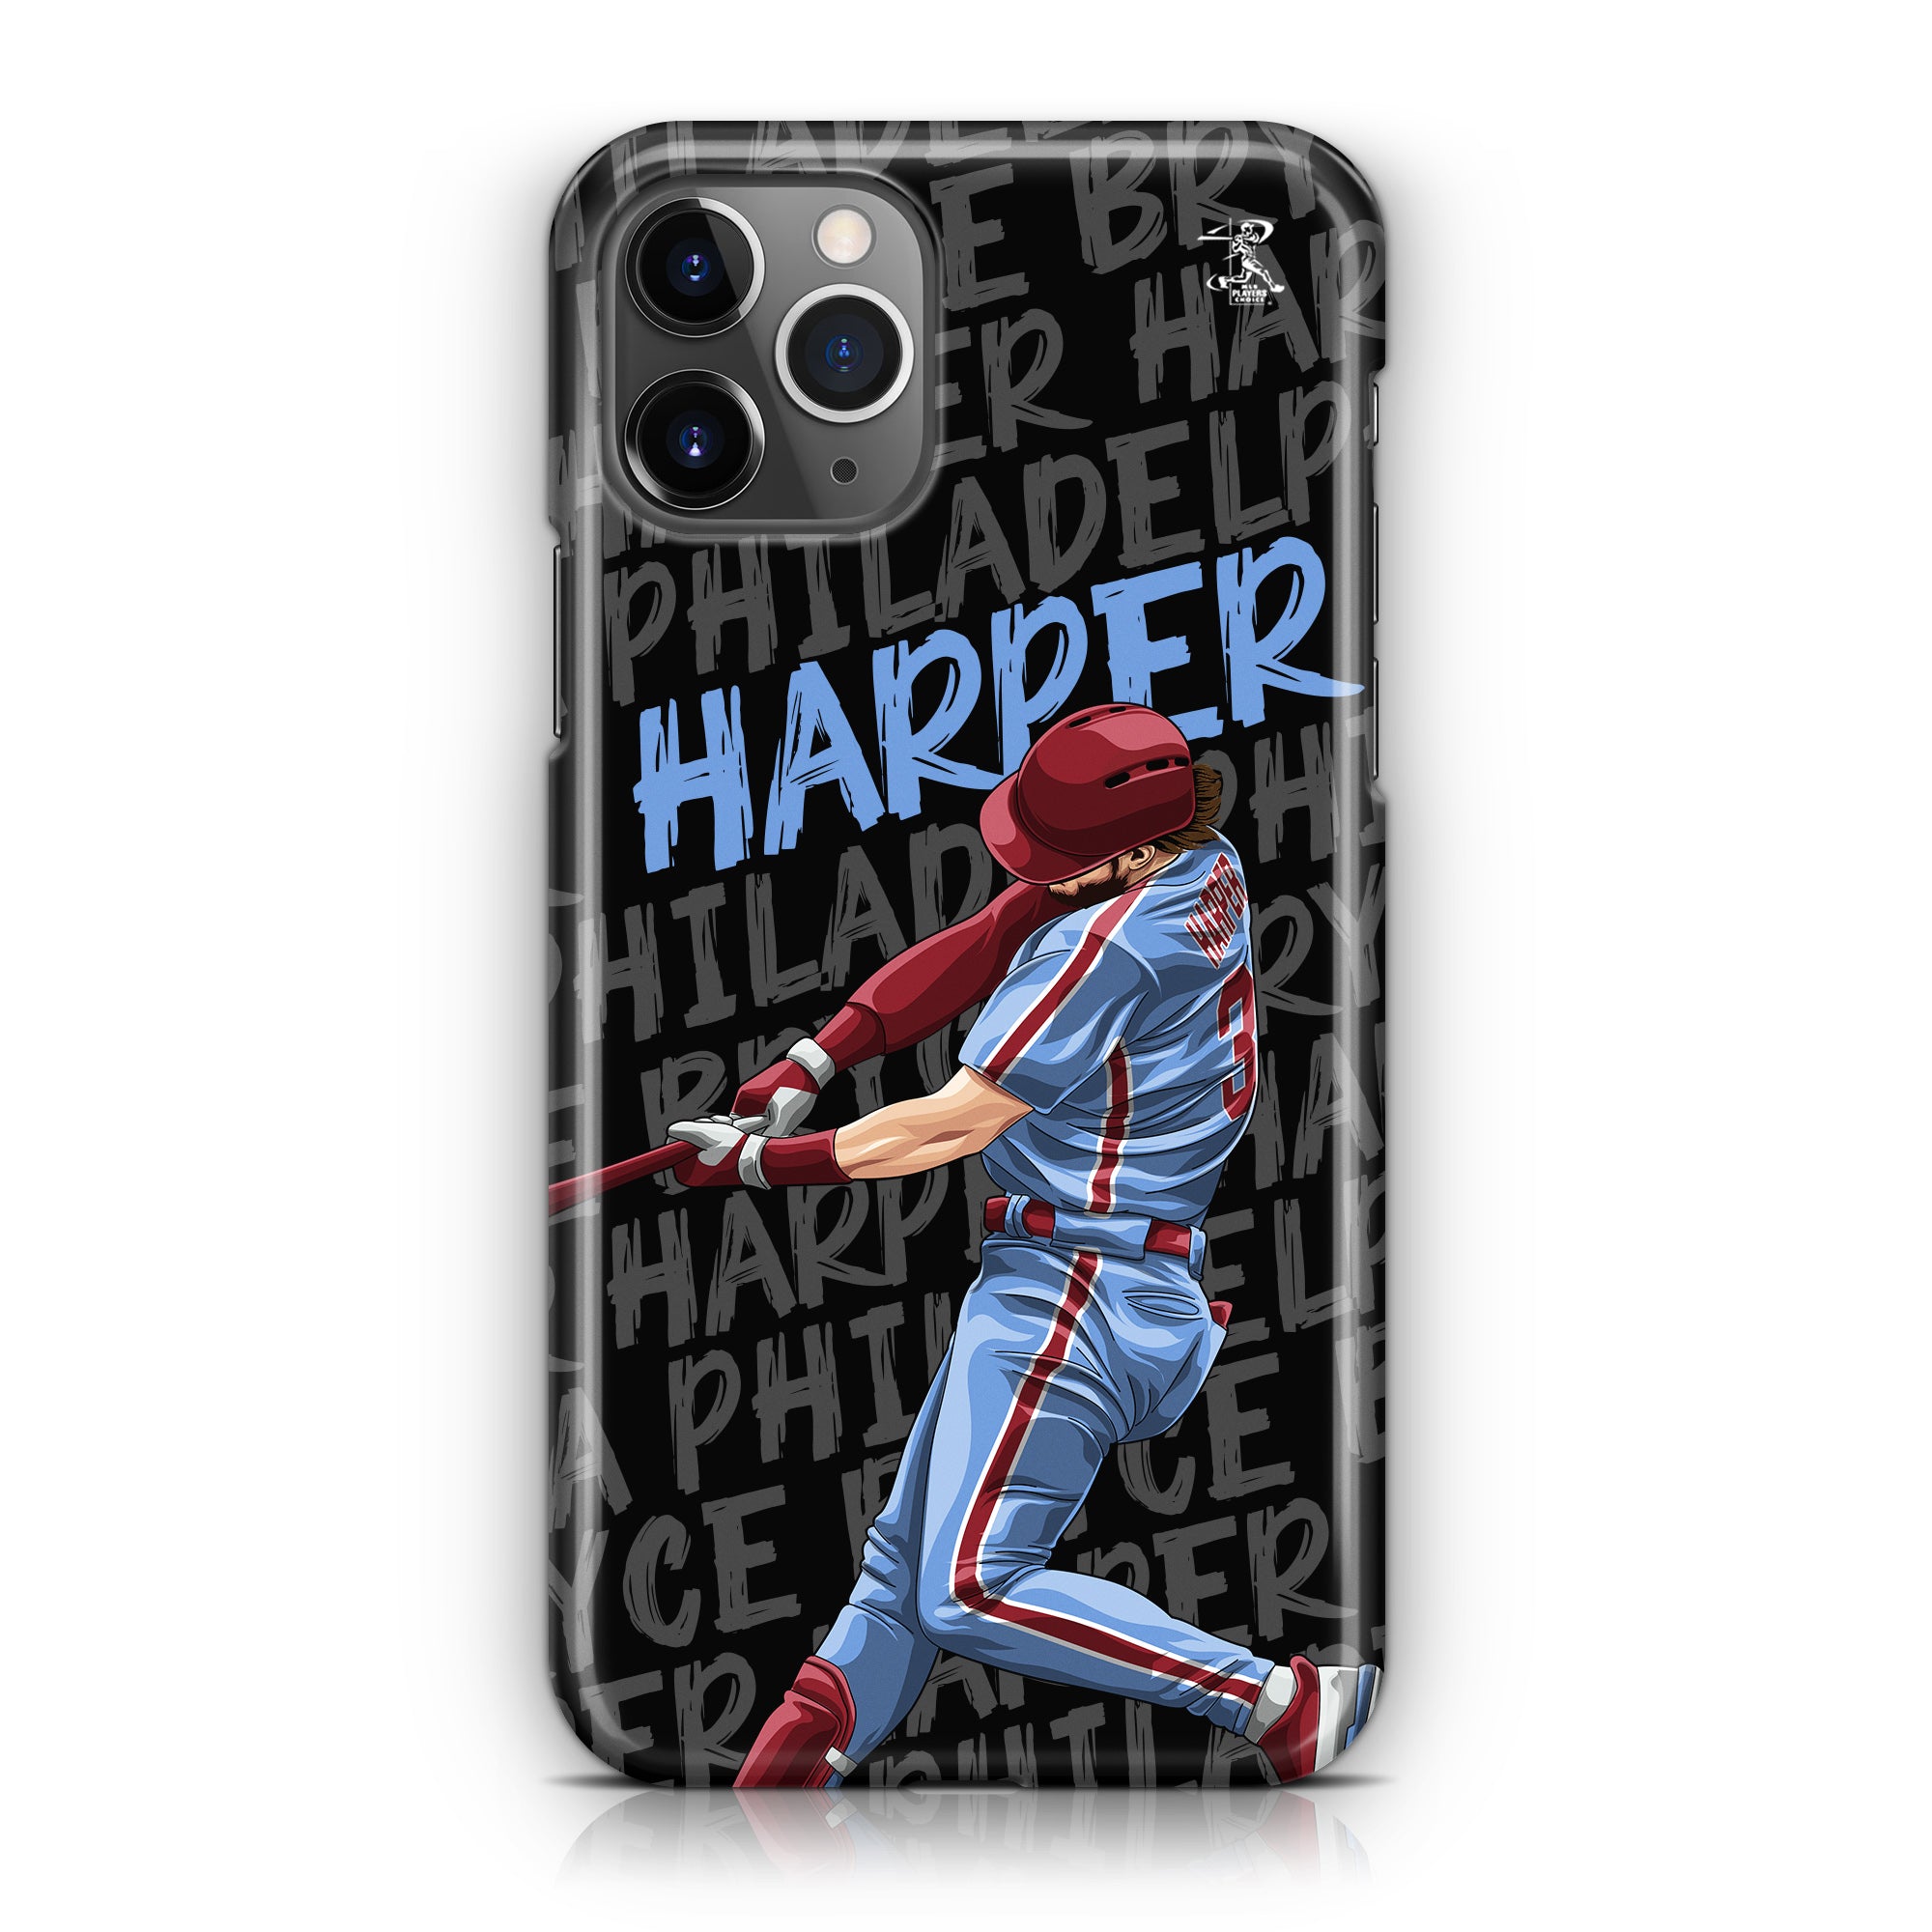 Bryce Harper iPhone Cases for Sale